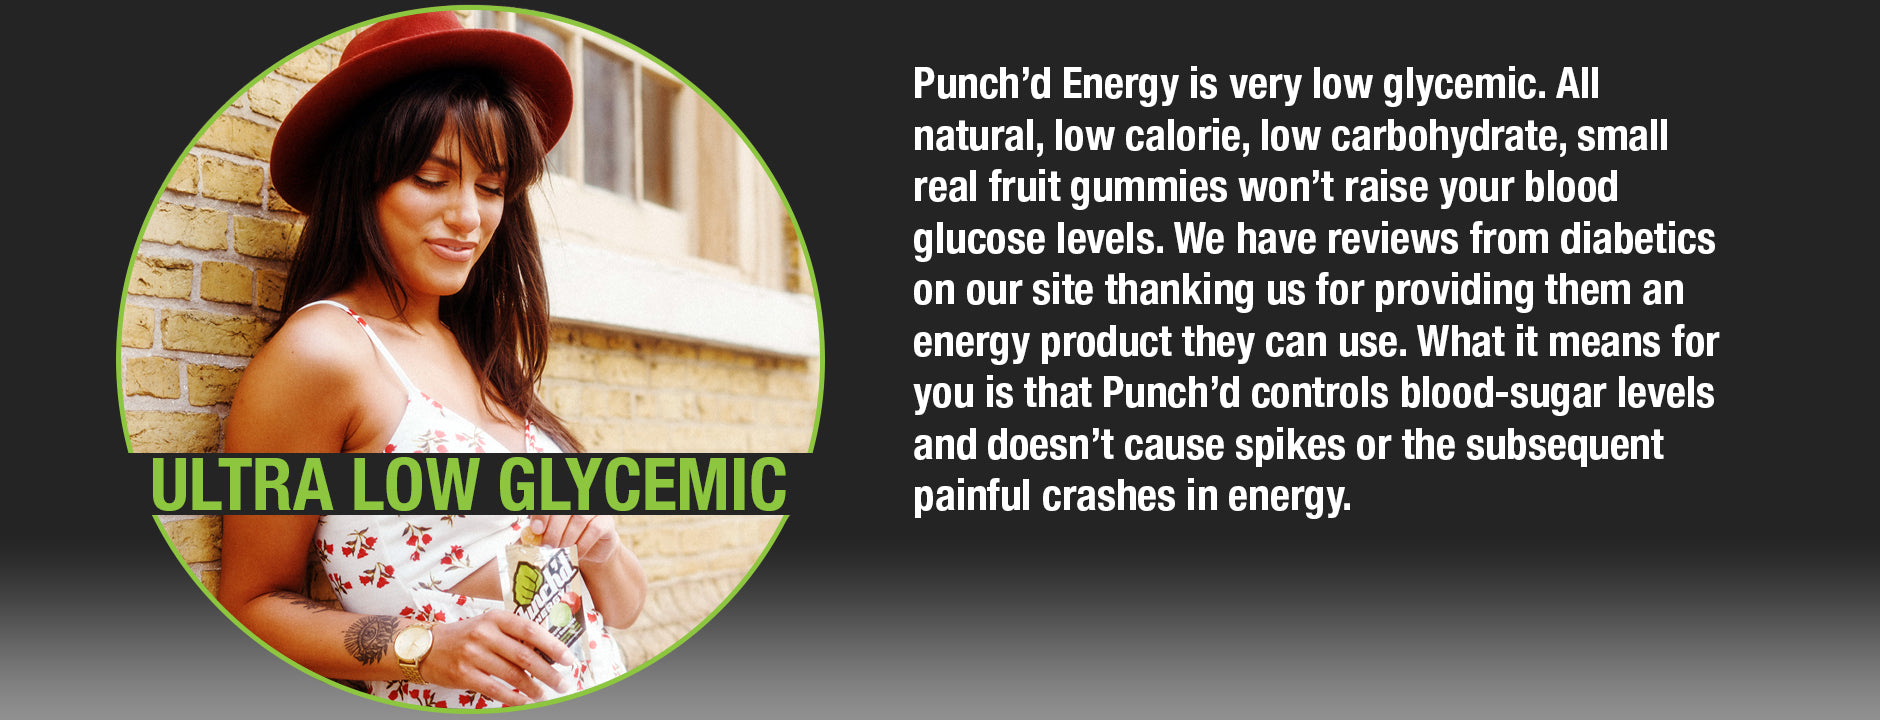 Punch'd Energy Ultra Low Glycemic